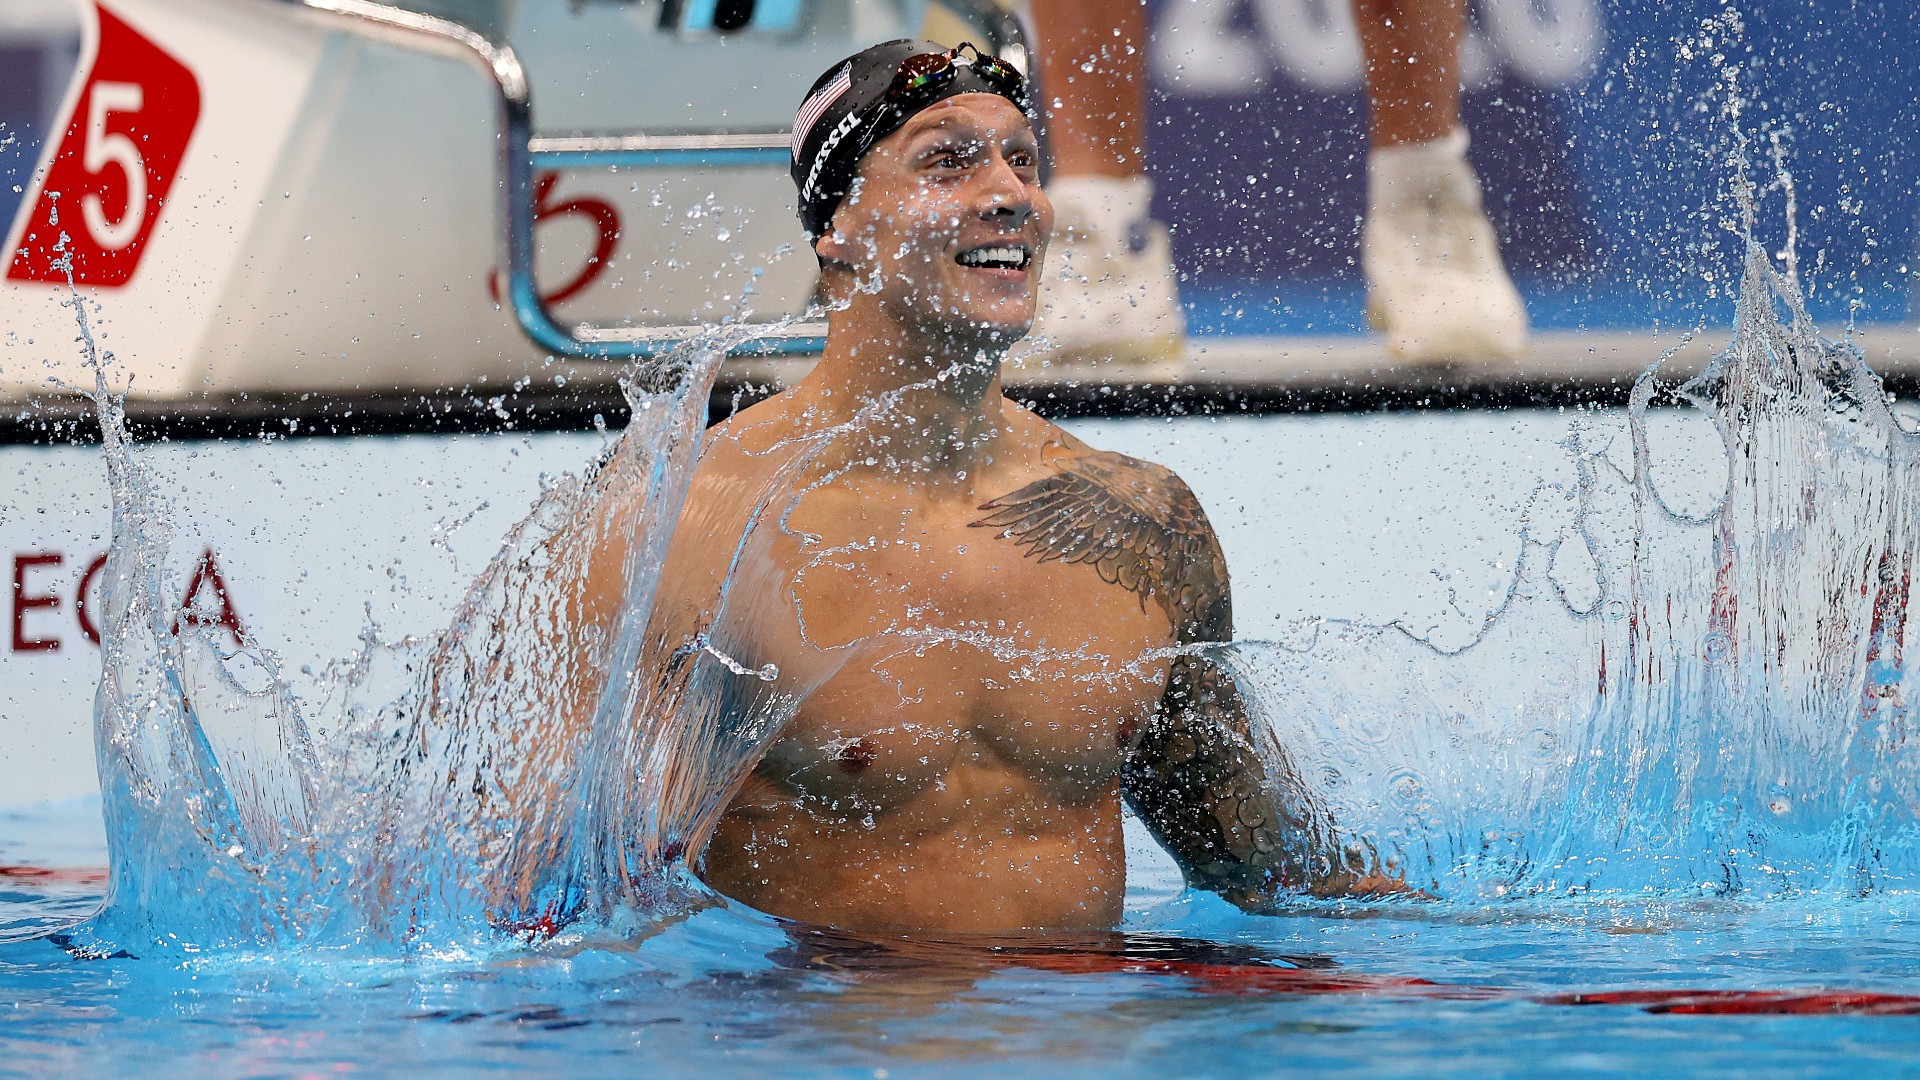 Caeleb Dressel has emotional reaction to winning Olympic gold in 100 freestyle